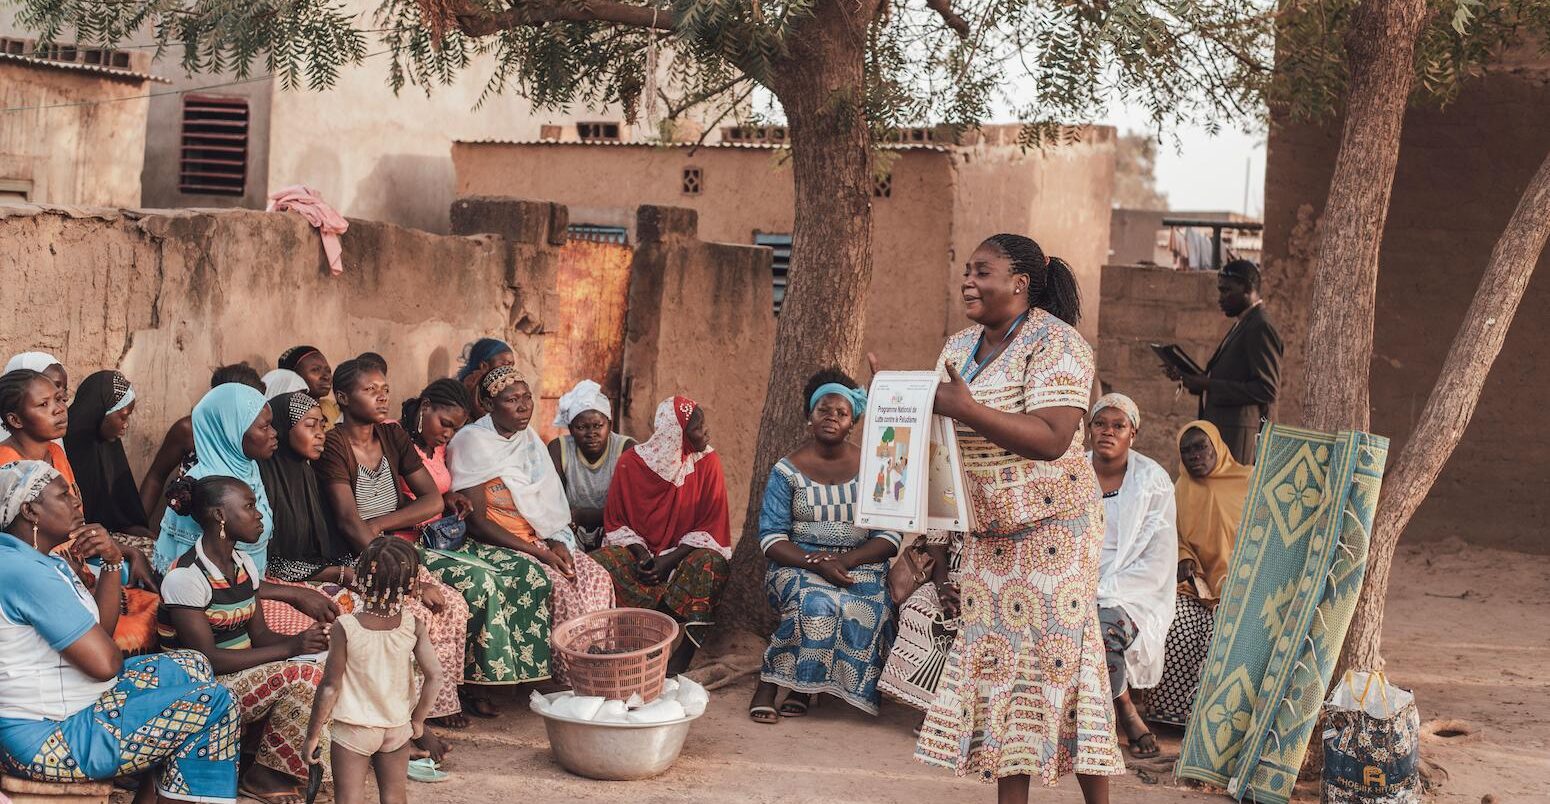 A woman from the health service shows villagers how to prevent malaria in Ouagadougou, Burkina Faso.